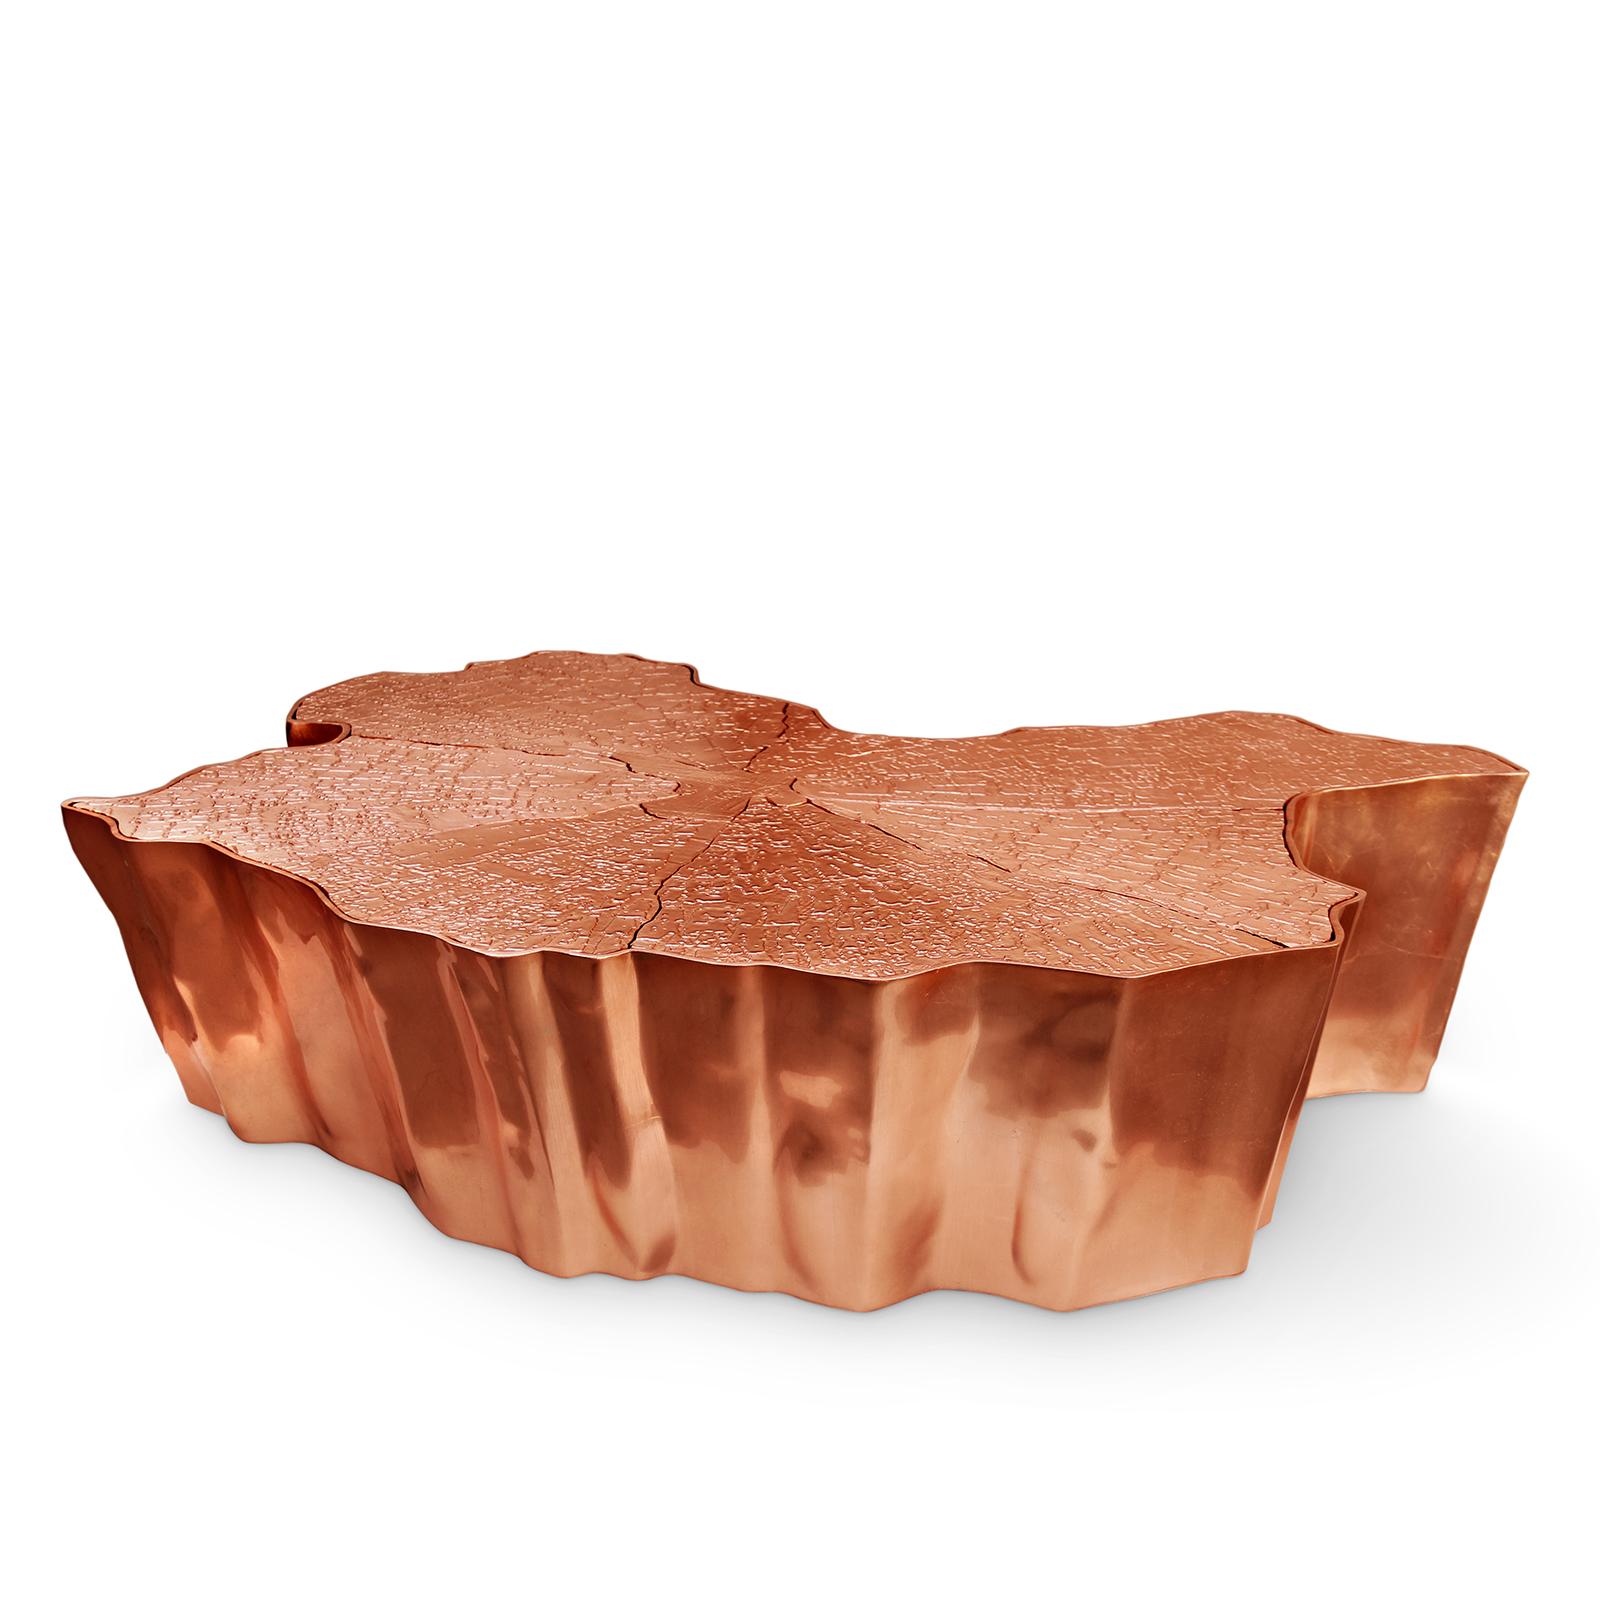 Coffee table Heaven copper in casted aluminium
covered with polished copper. 
L 138 x D 95 x H 36cm, price: 21000,00€.
Also available in side table Heaven copper.